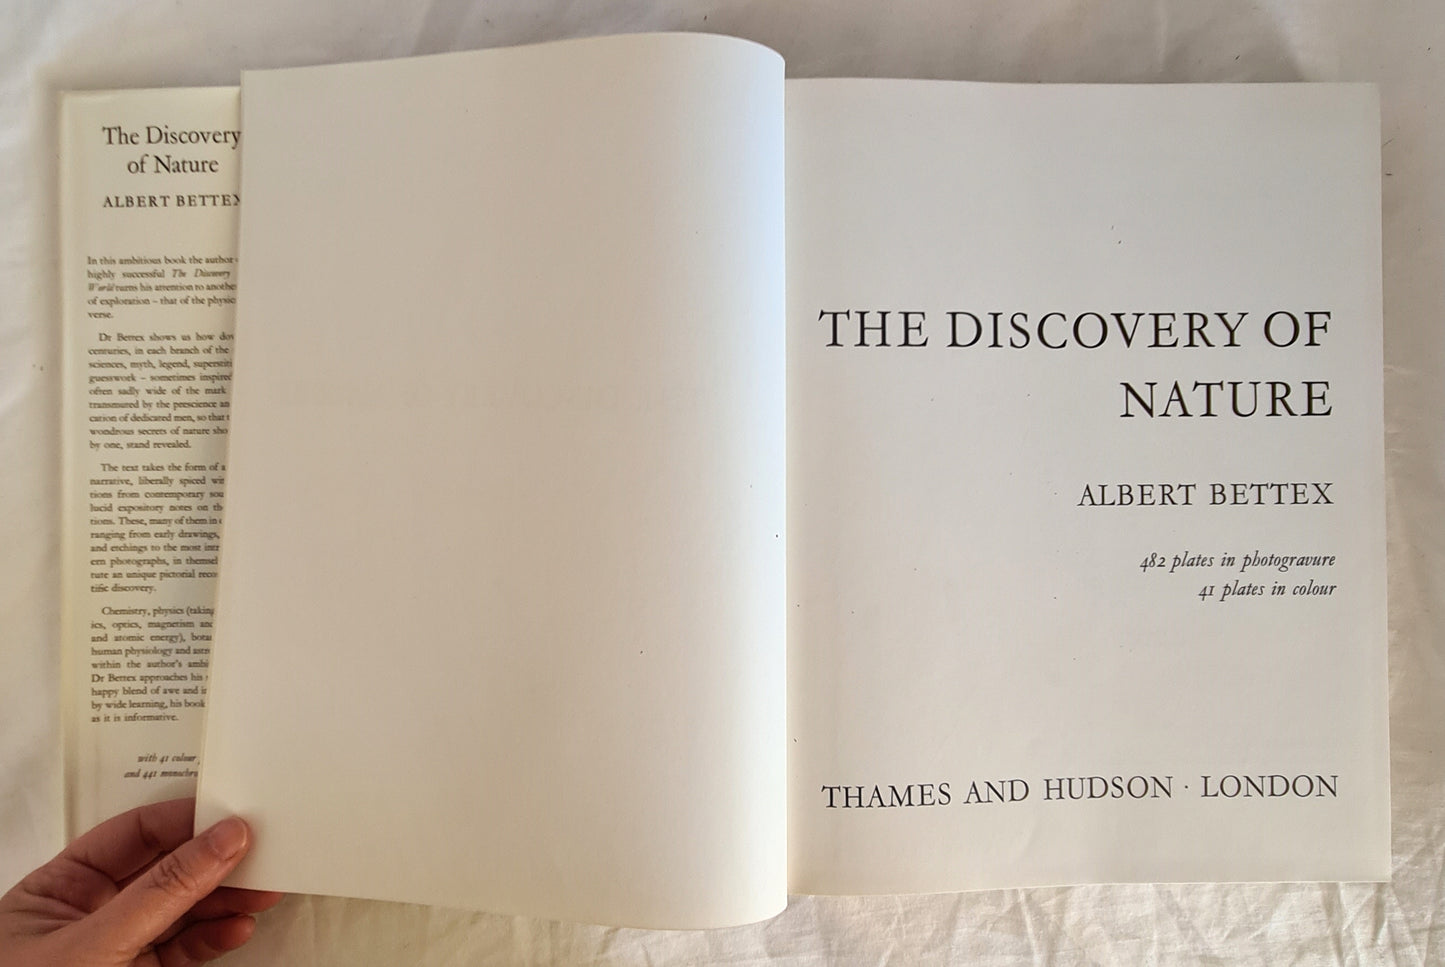 The Discovery of Nature by Albert Bettex